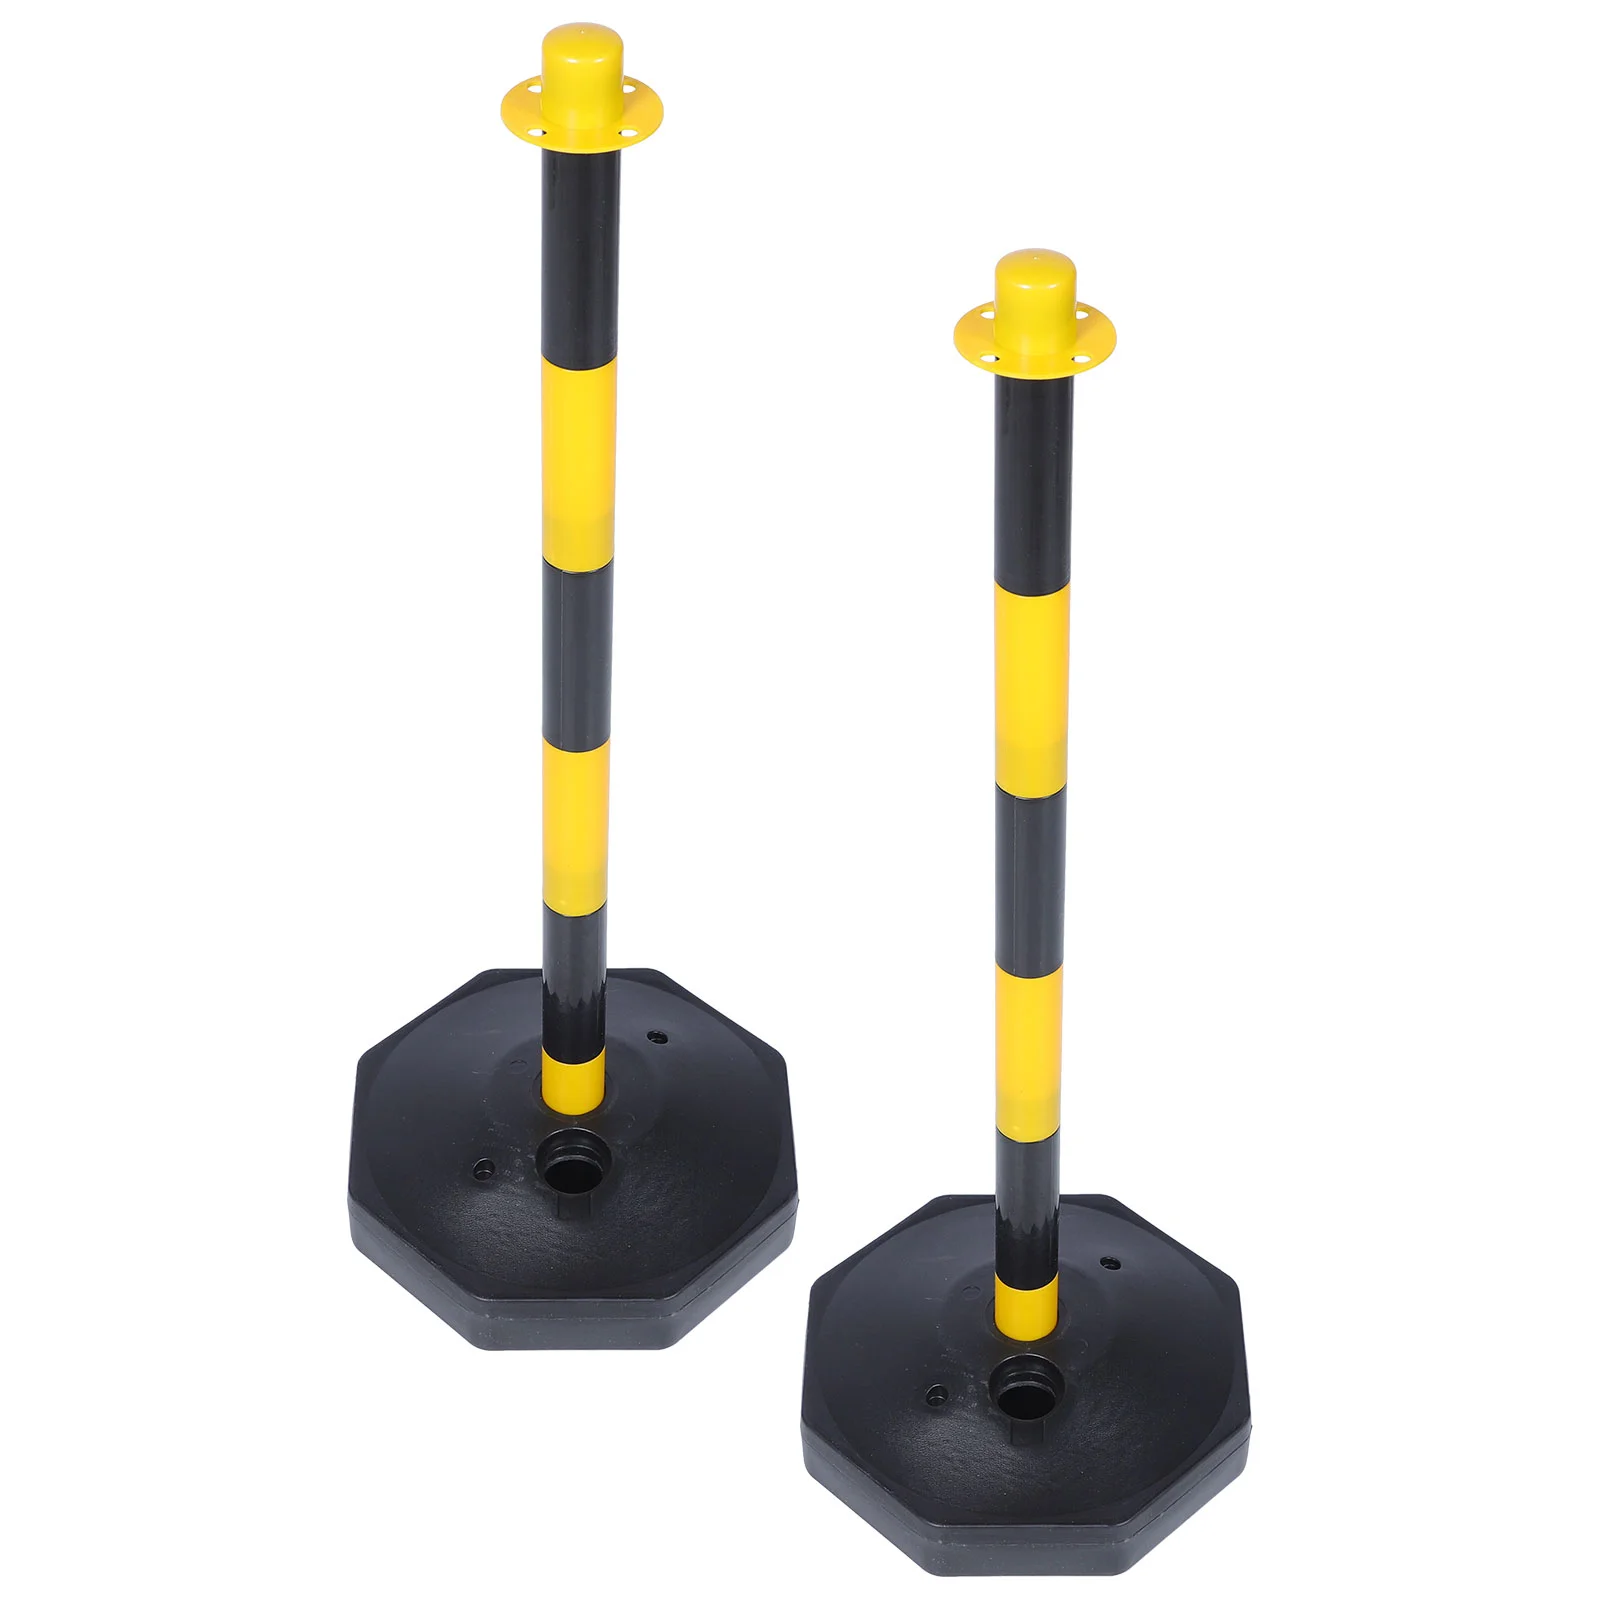 

2pcs Traffic Delineator Post Cone Parking Gadgets Parking Assistant for Garage